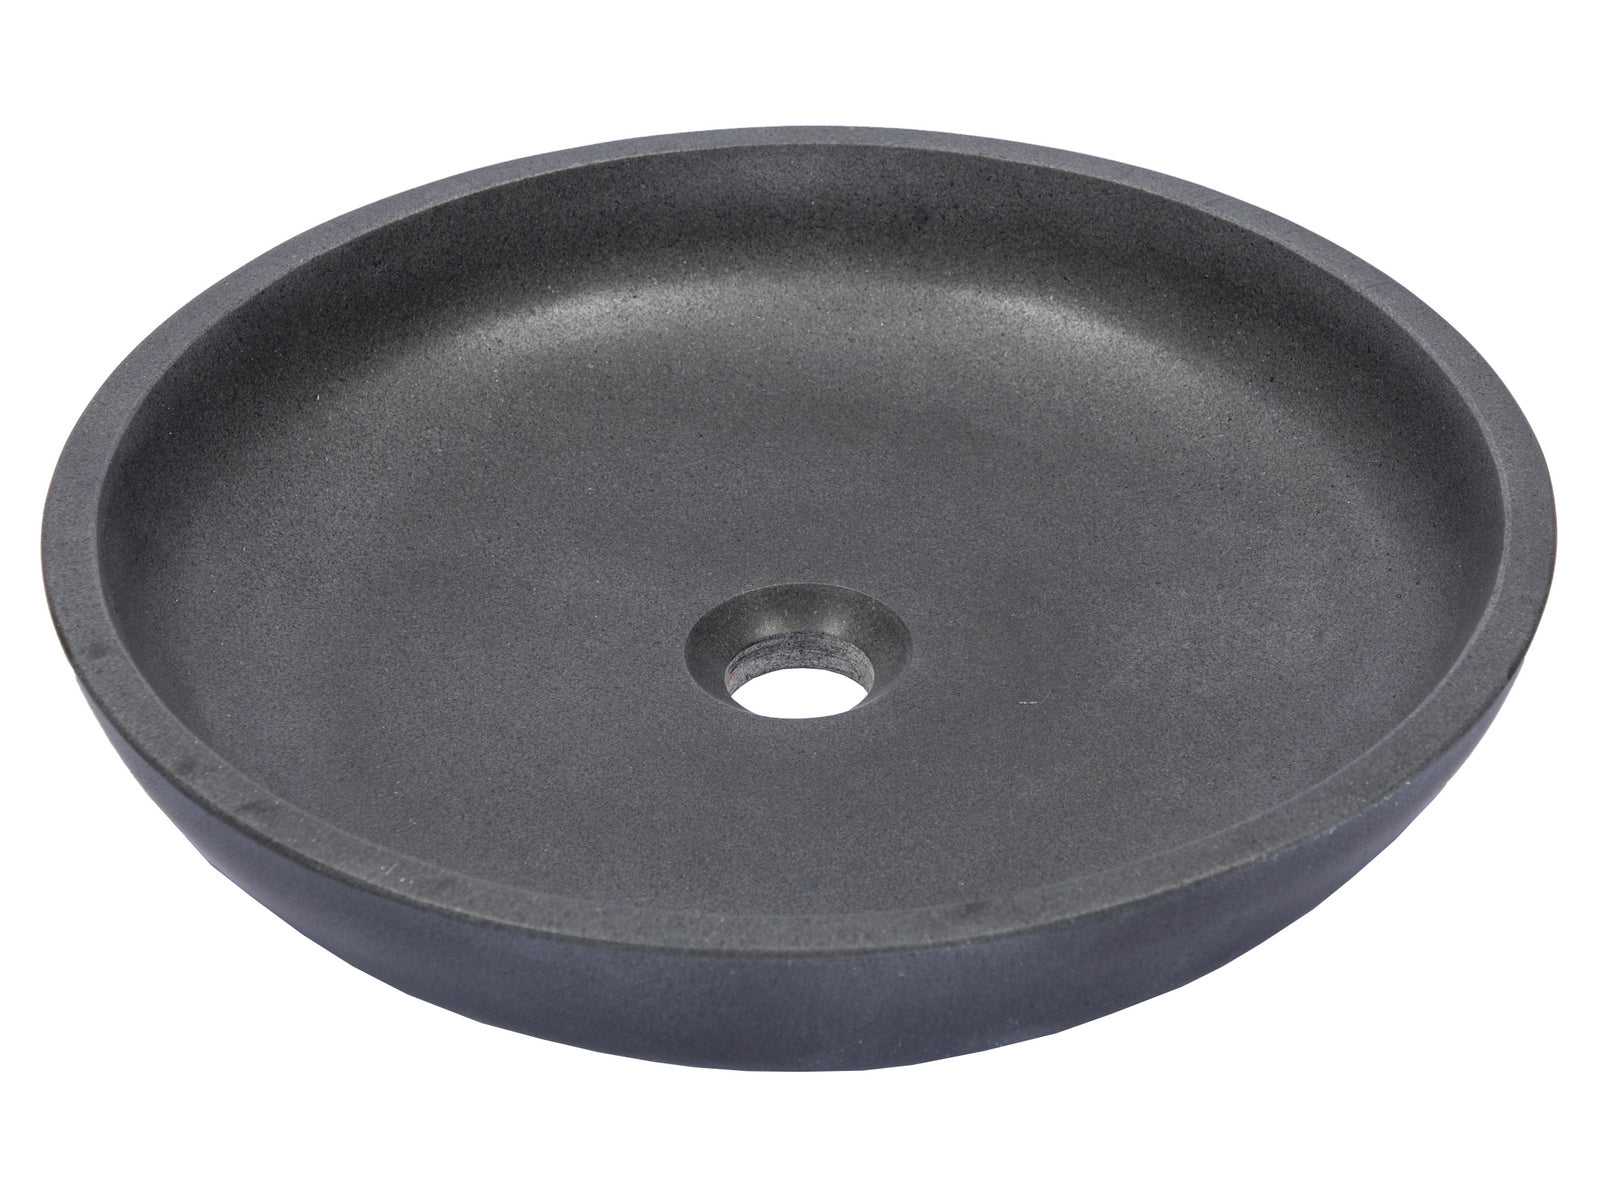 Shallow Round Vessel Sink in Lava Stone